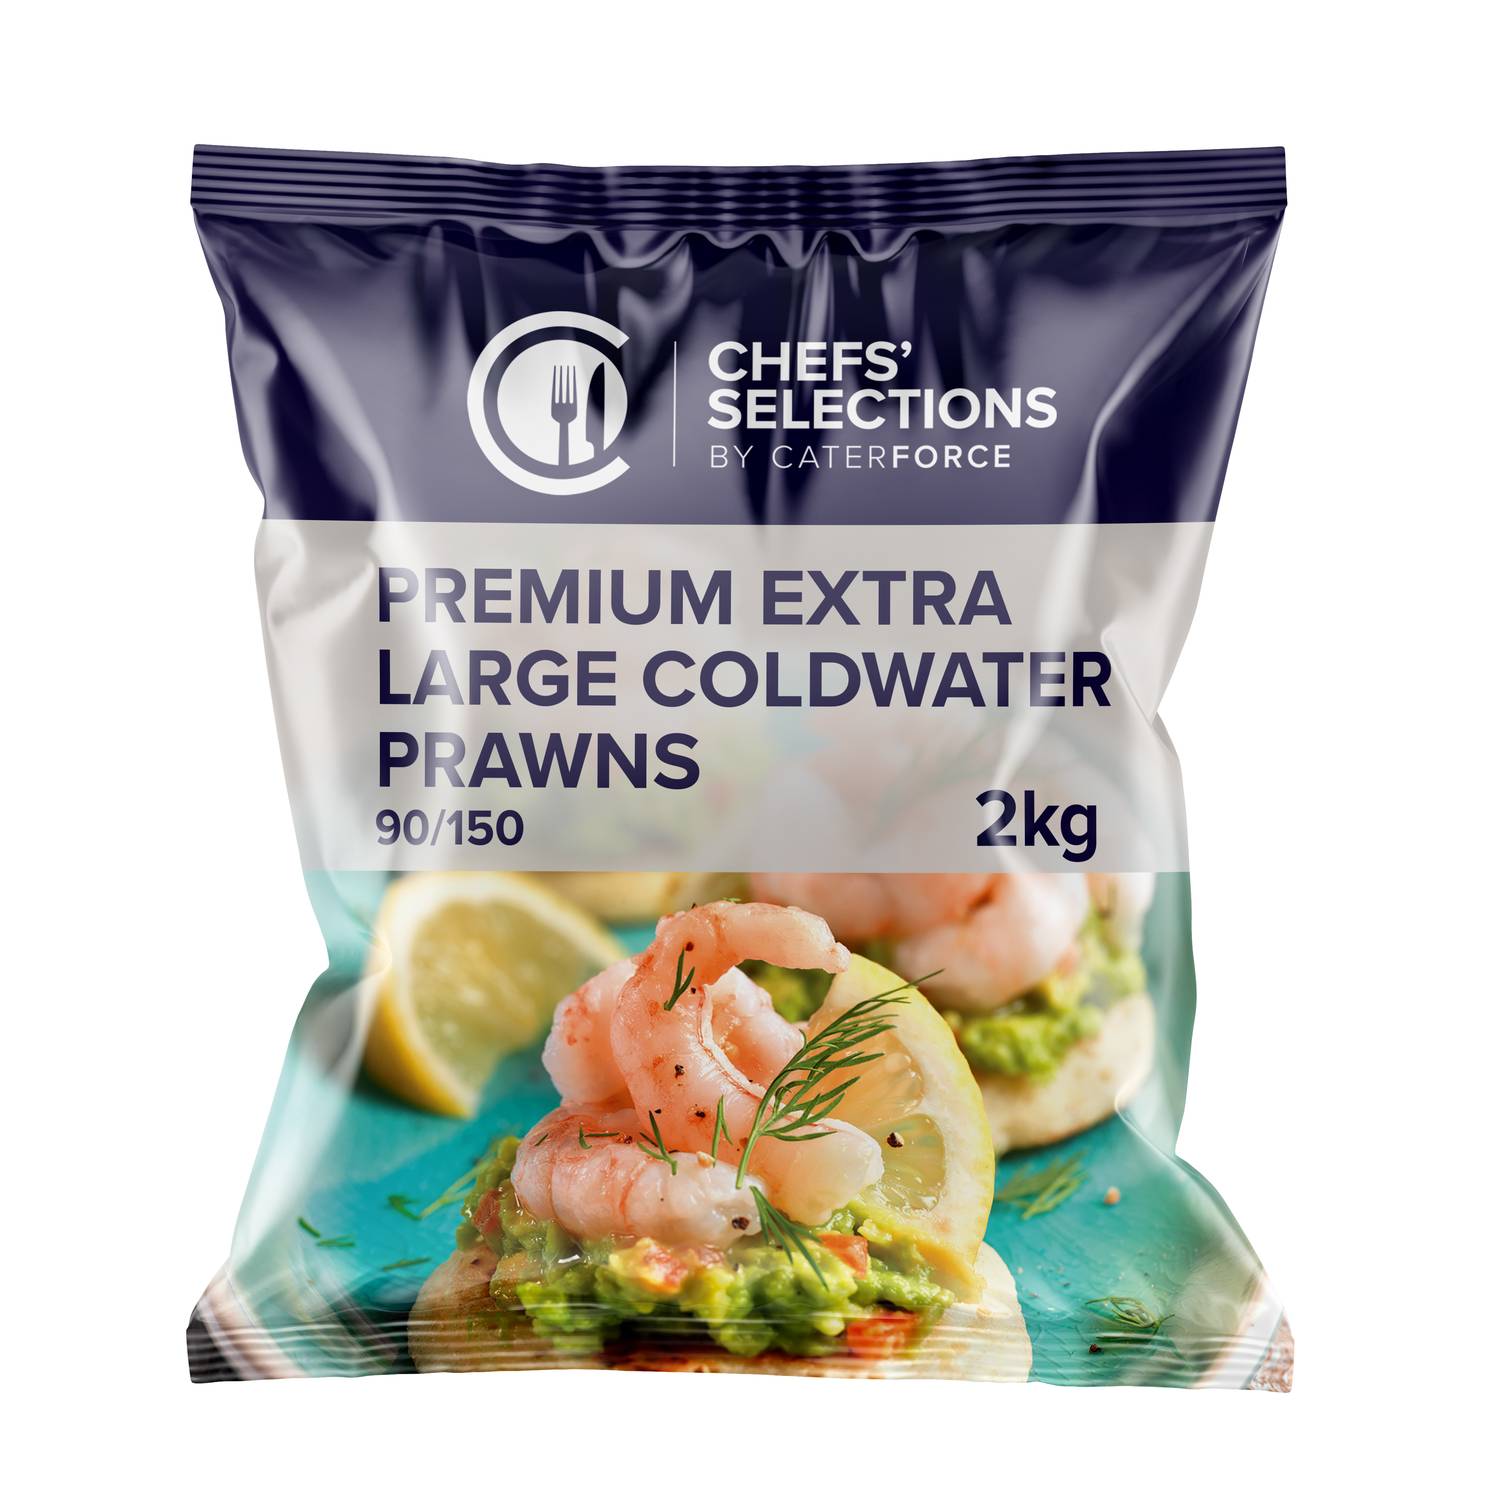 Chefs’ Selections Premium Extra Large Coldwater Prawns 90/150 (5 x 2kg)